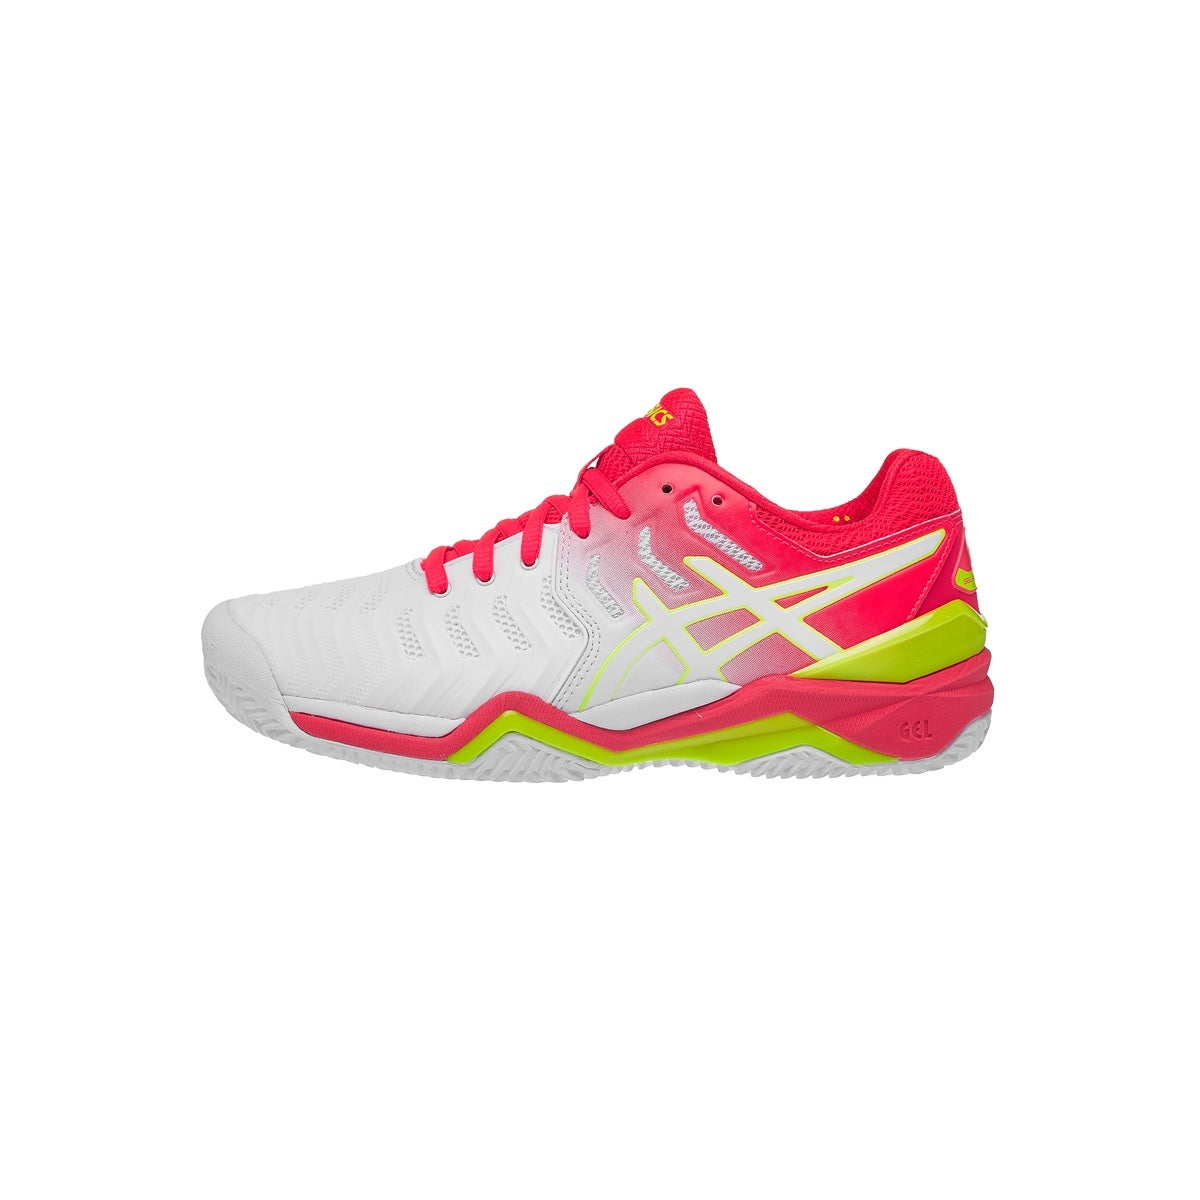 Asics Gel Resolution 7 Clay White/Pink Women's Shoes 360° View